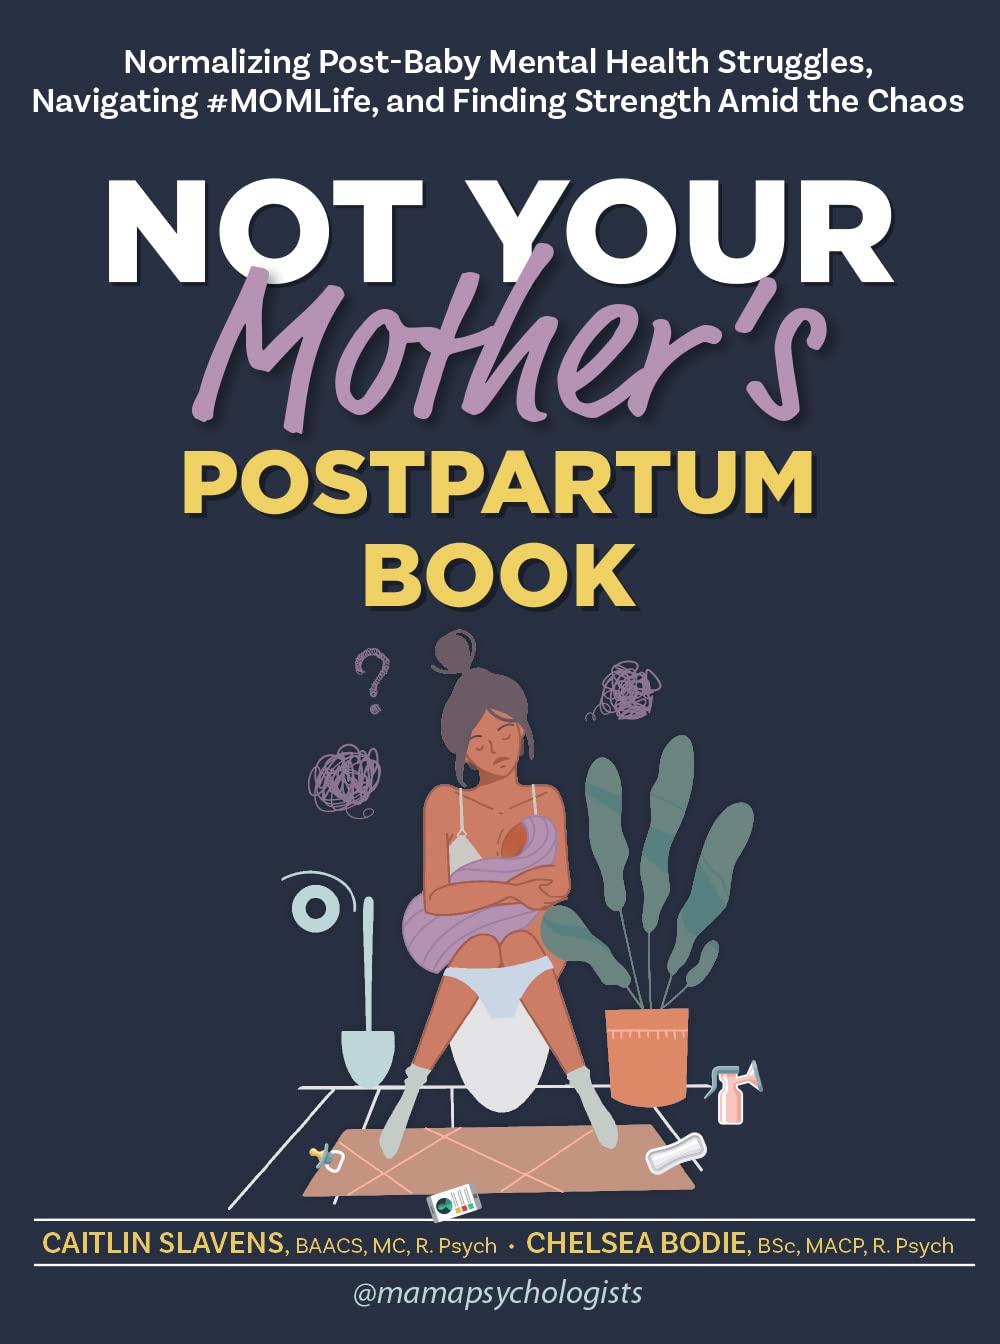 "Not Your Mother’s Postpartum Book" by Caitlin Slavens, BAACS, M.C., R. Psych, and Chelsea Bodie, B.Sc., MACP, R. Psych